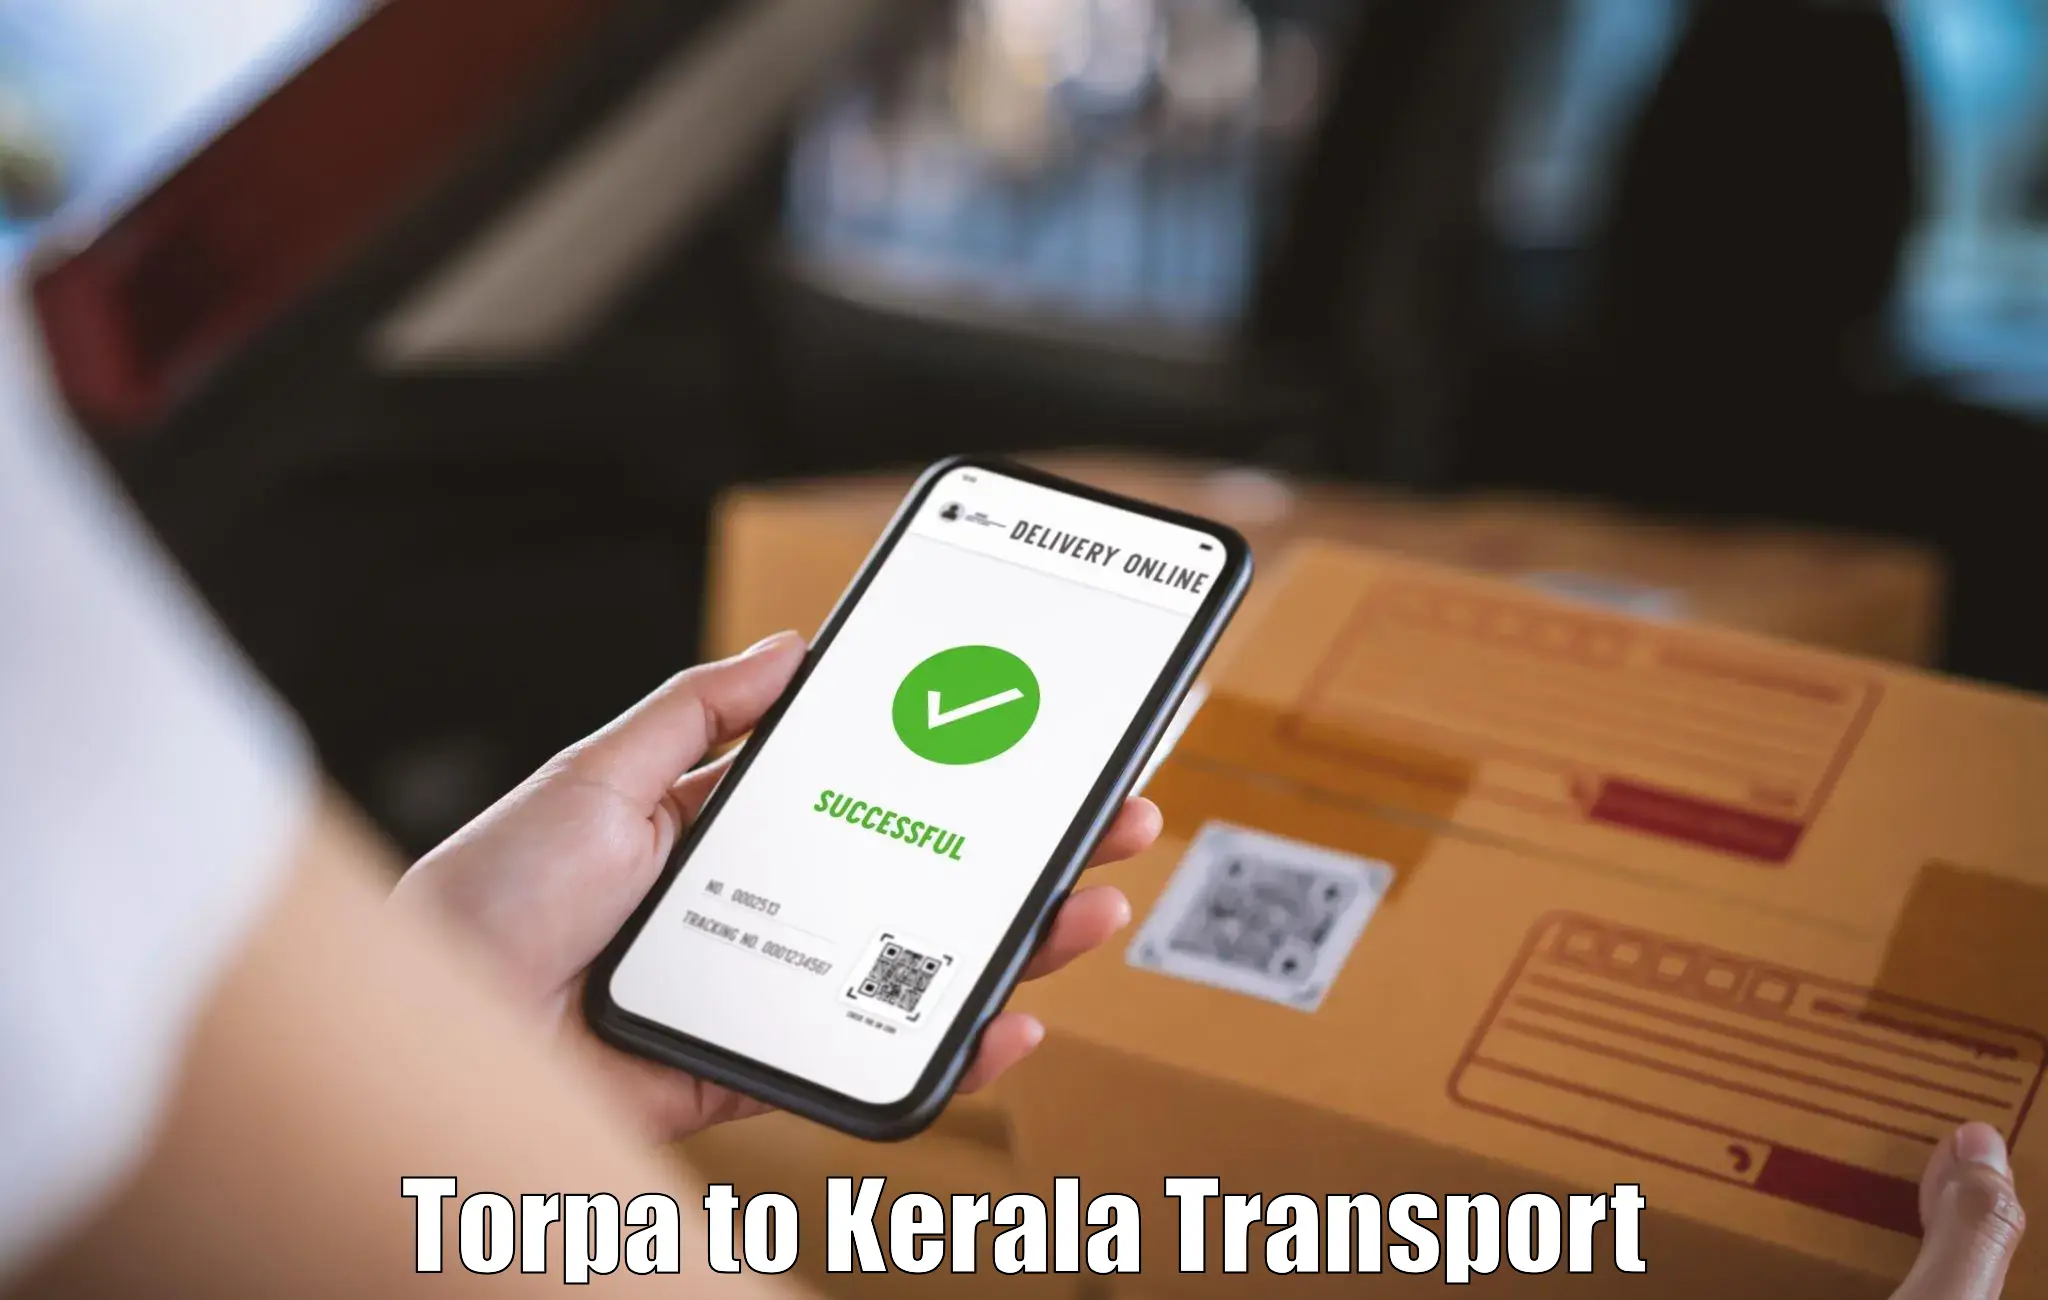 Transport in sharing Torpa to Kilimanoor